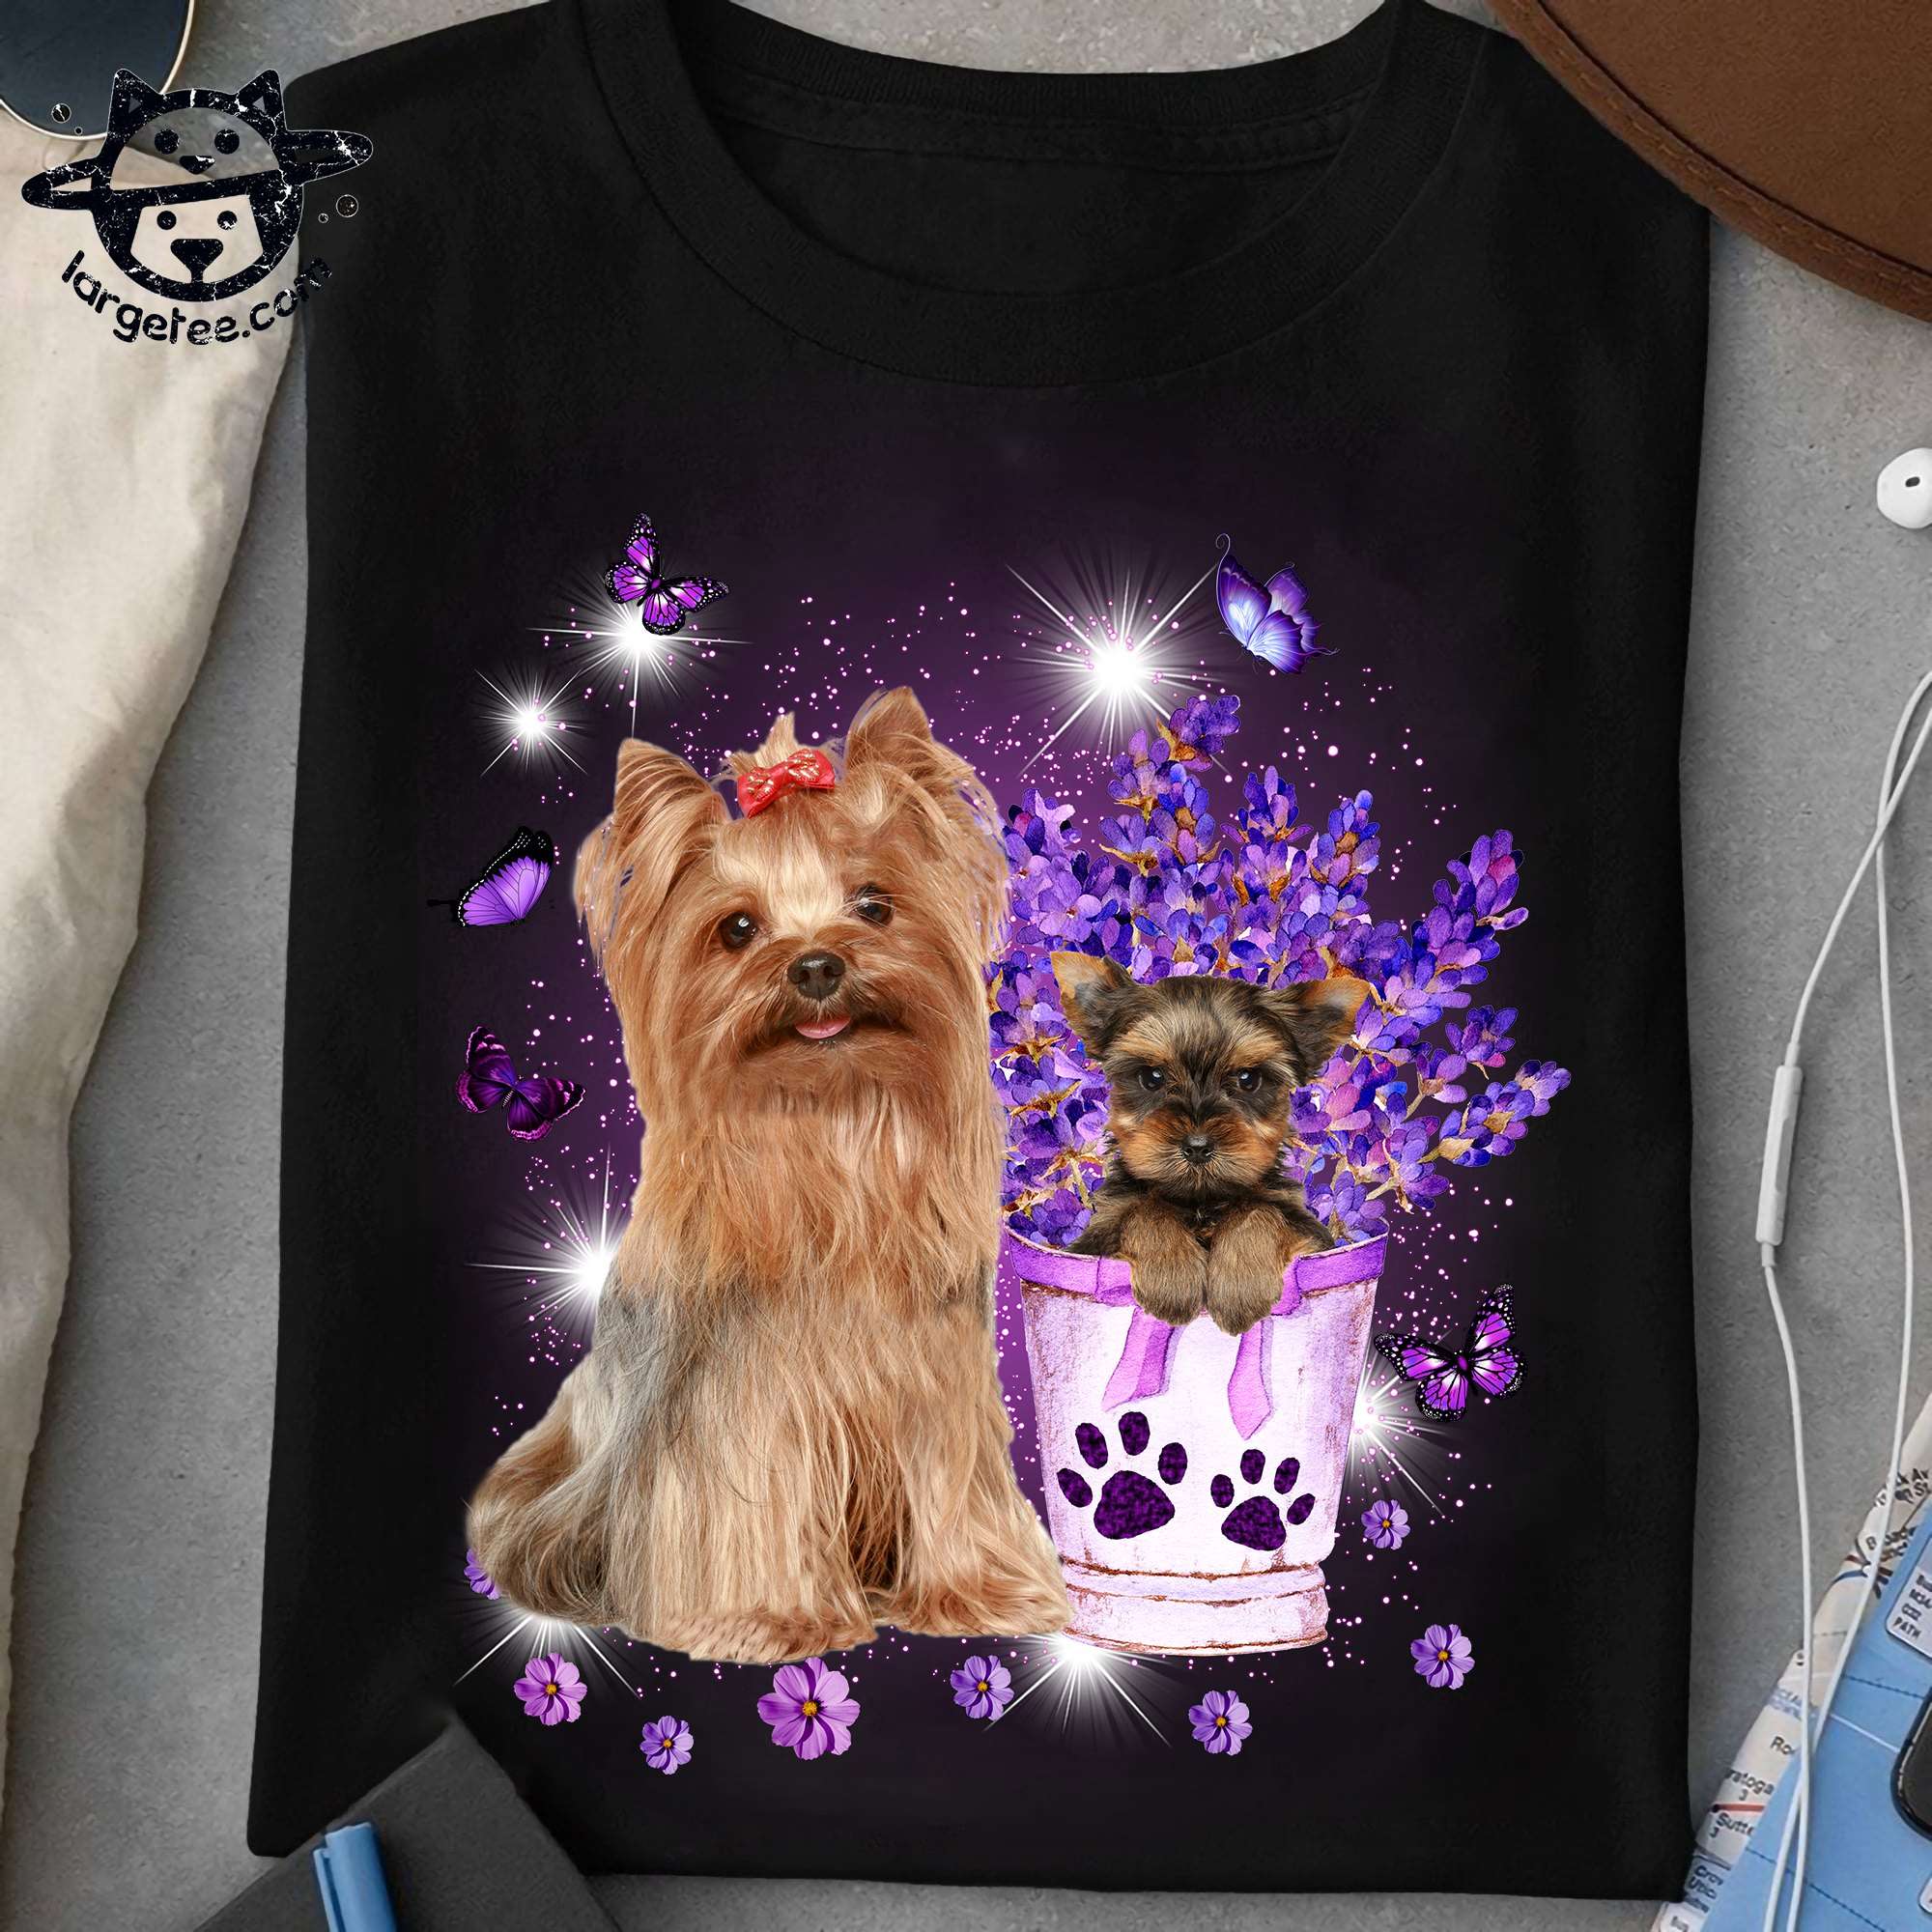 Shih Tzu and York shire - T-shirt for dog lover